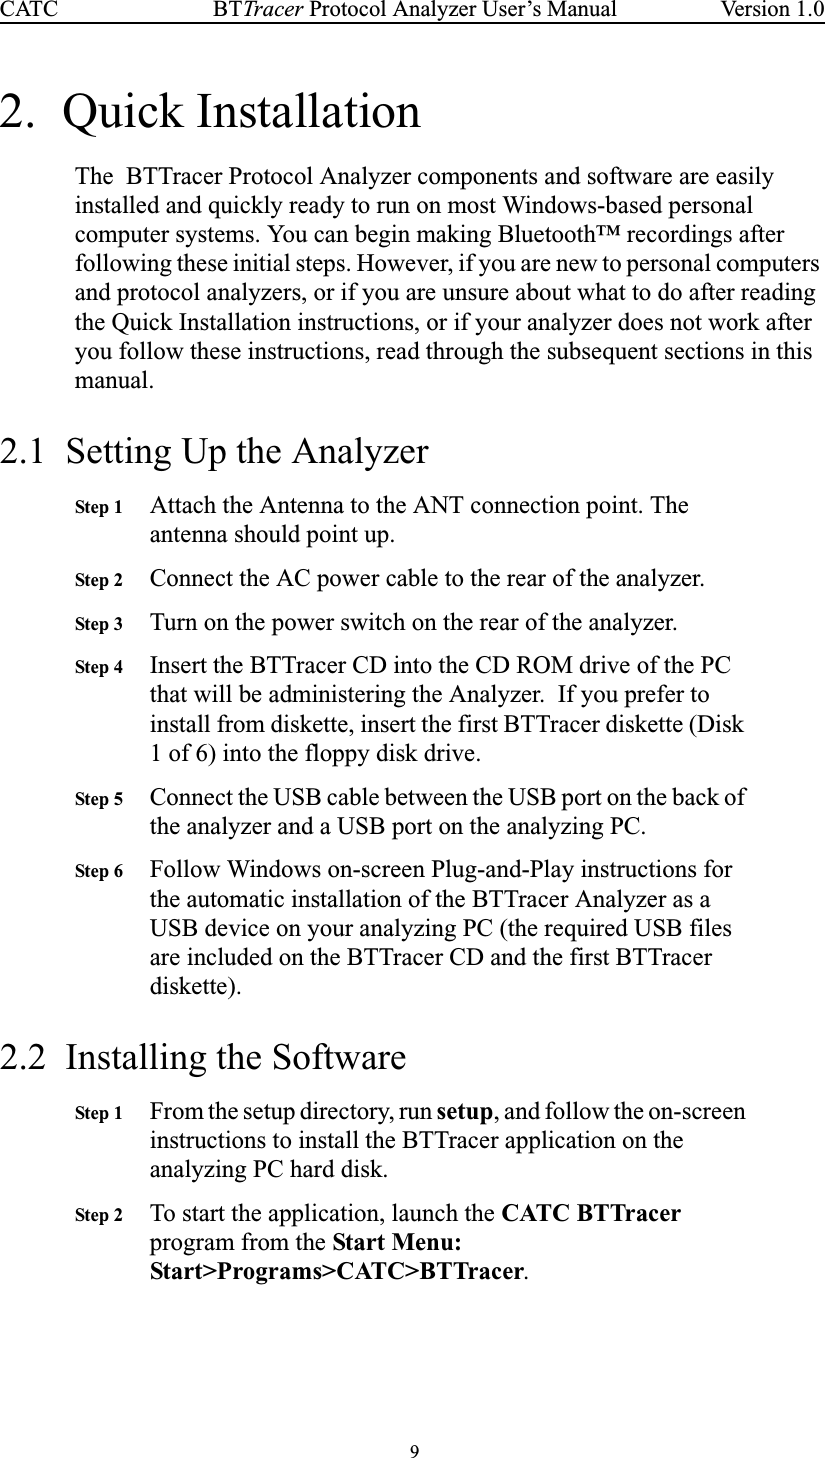 9BTTracer Protocol Analyzer User’s ManualCATC Version 1.02. Quick InstallationThe BTTracer Protocol Analyzer components and software are easilyinstalled and quickly ready to run on most Windows-based personalcomputer systems. You can begin making Bluetooth™ recordings afterfollowing these initial steps. However, if you are new to personal computersand protocol analyzers, or if you are unsure about what to do after readingthe Quick Installation instructions, or if your analyzer does not work afteryou follow these instructions, read through the subsequent sections in thismanual.2.1 Setting Up the AnalyzerStep 1 Attach the Antenna to the ANT connection point. Theantenna should point up.Step 2 Connect the AC power cable to the rear of the analyzer.Step 3 Turn on the power switch on the rear of the analyzer.Step 4 Insert the BTTracer CD into the CD ROM drive of the PCthat will be administering the Analyzer. If you prefer toinstall from diskette, insert the first BTTracer diskette (Disk1 of 6) into the floppy disk drive.Step 5 Connect the USB cable between the USB port on the back ofthe analyzer and a USB port on the analyzing PC.Step 6 Follow Windows on-screen Plug-and-Play instructions forthe automatic installation of the BTTracer Analyzer as aUSB device on your analyzing PC (the required USB filesare included on the BTTracer CD and the first BTTracerdiskette).2.2 Installing the SoftwareStep 1 From the setup directory, run setup, and follow the on-screeninstructions to install the BTTracer application on theanalyzing PC hard disk.Step 2 To start the application, launch the CATC BTTracerprogram from the Start Menu:Start&gt;Programs&gt;CATC&gt;BTTracer.